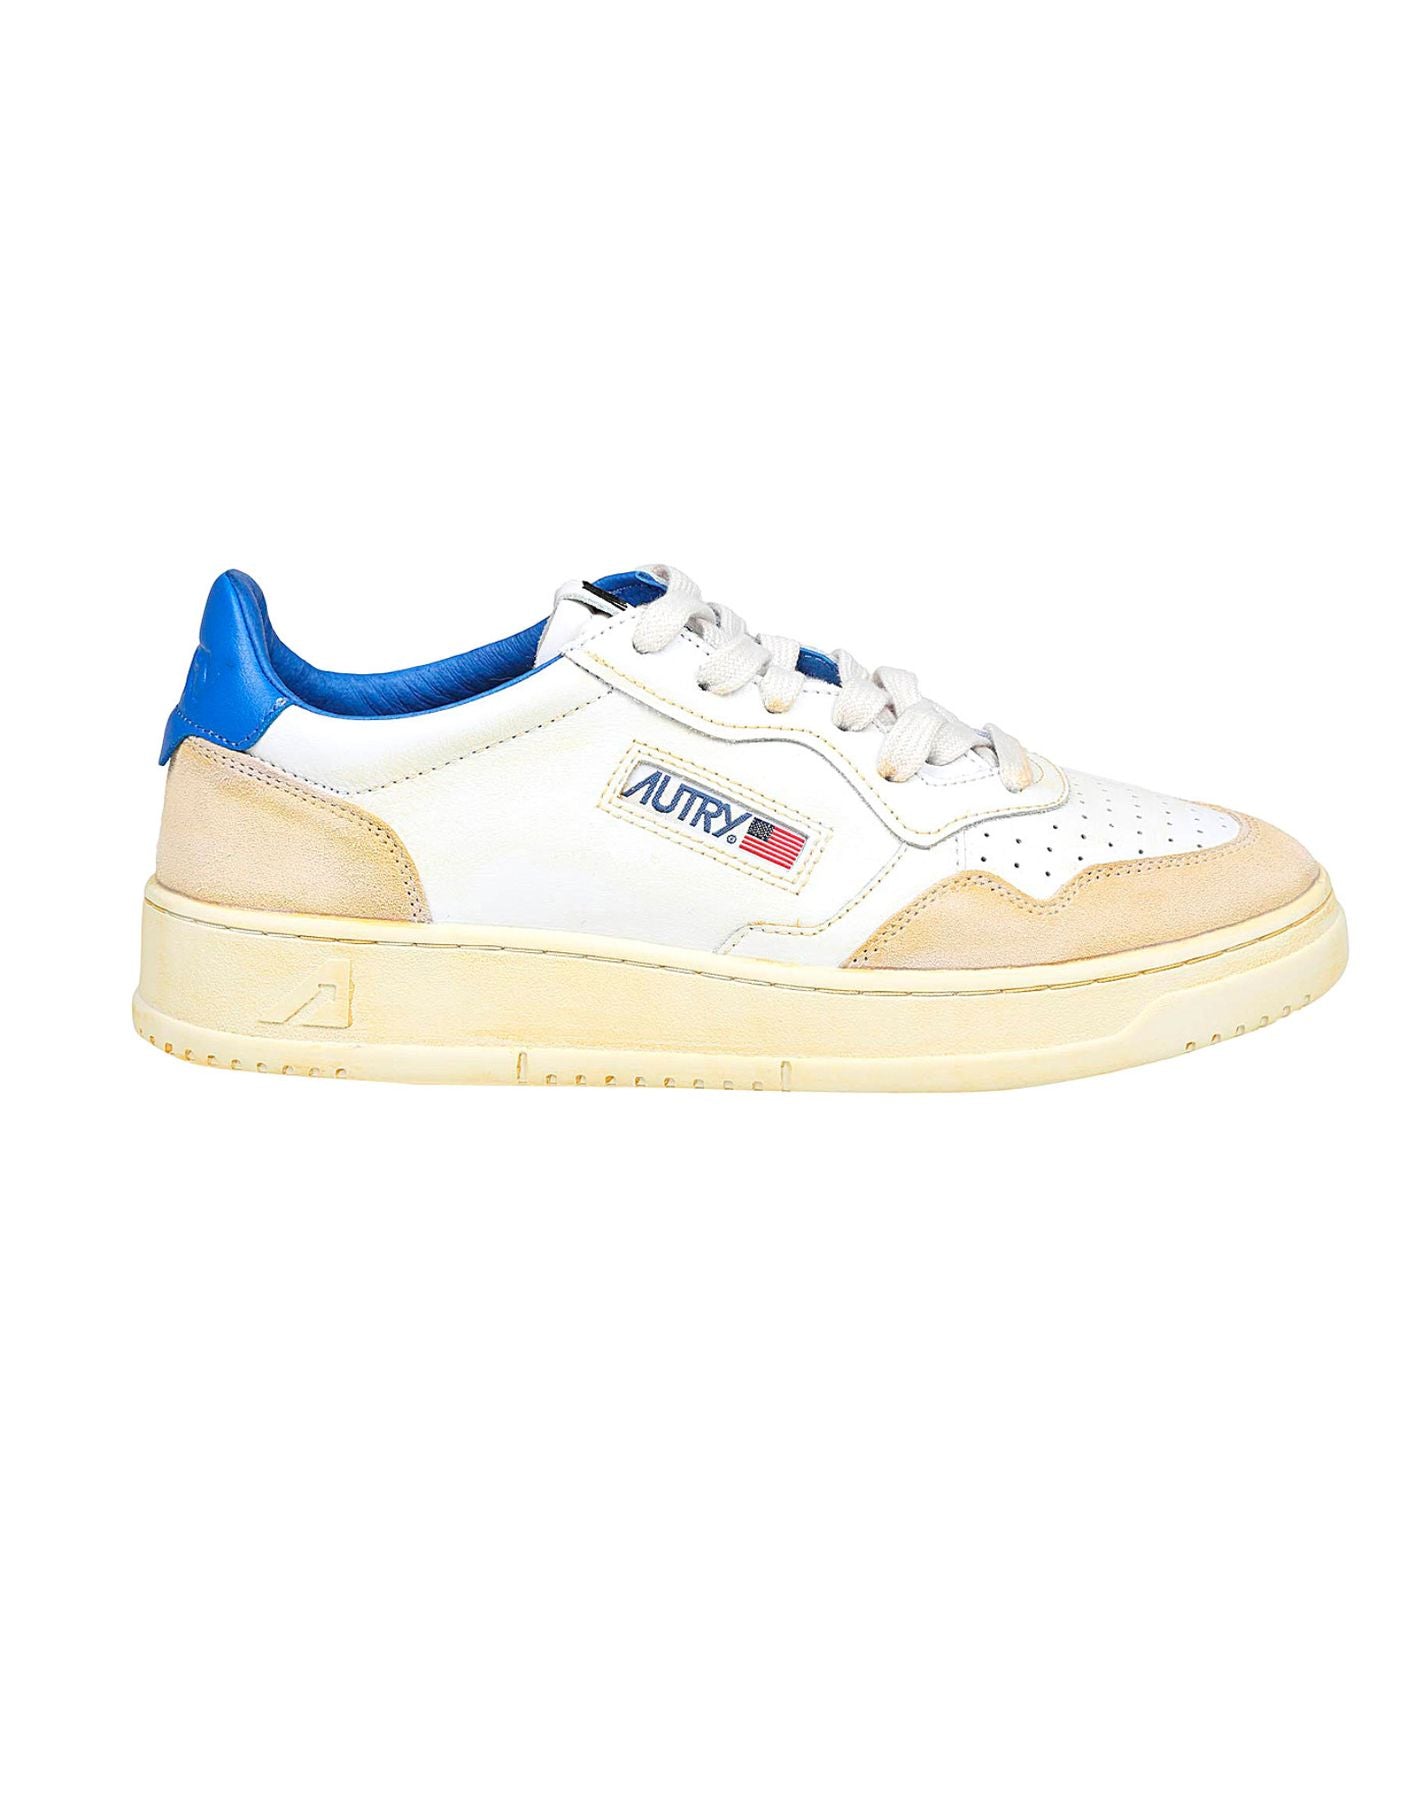 Sneakers man AVLM YL03 white Autry